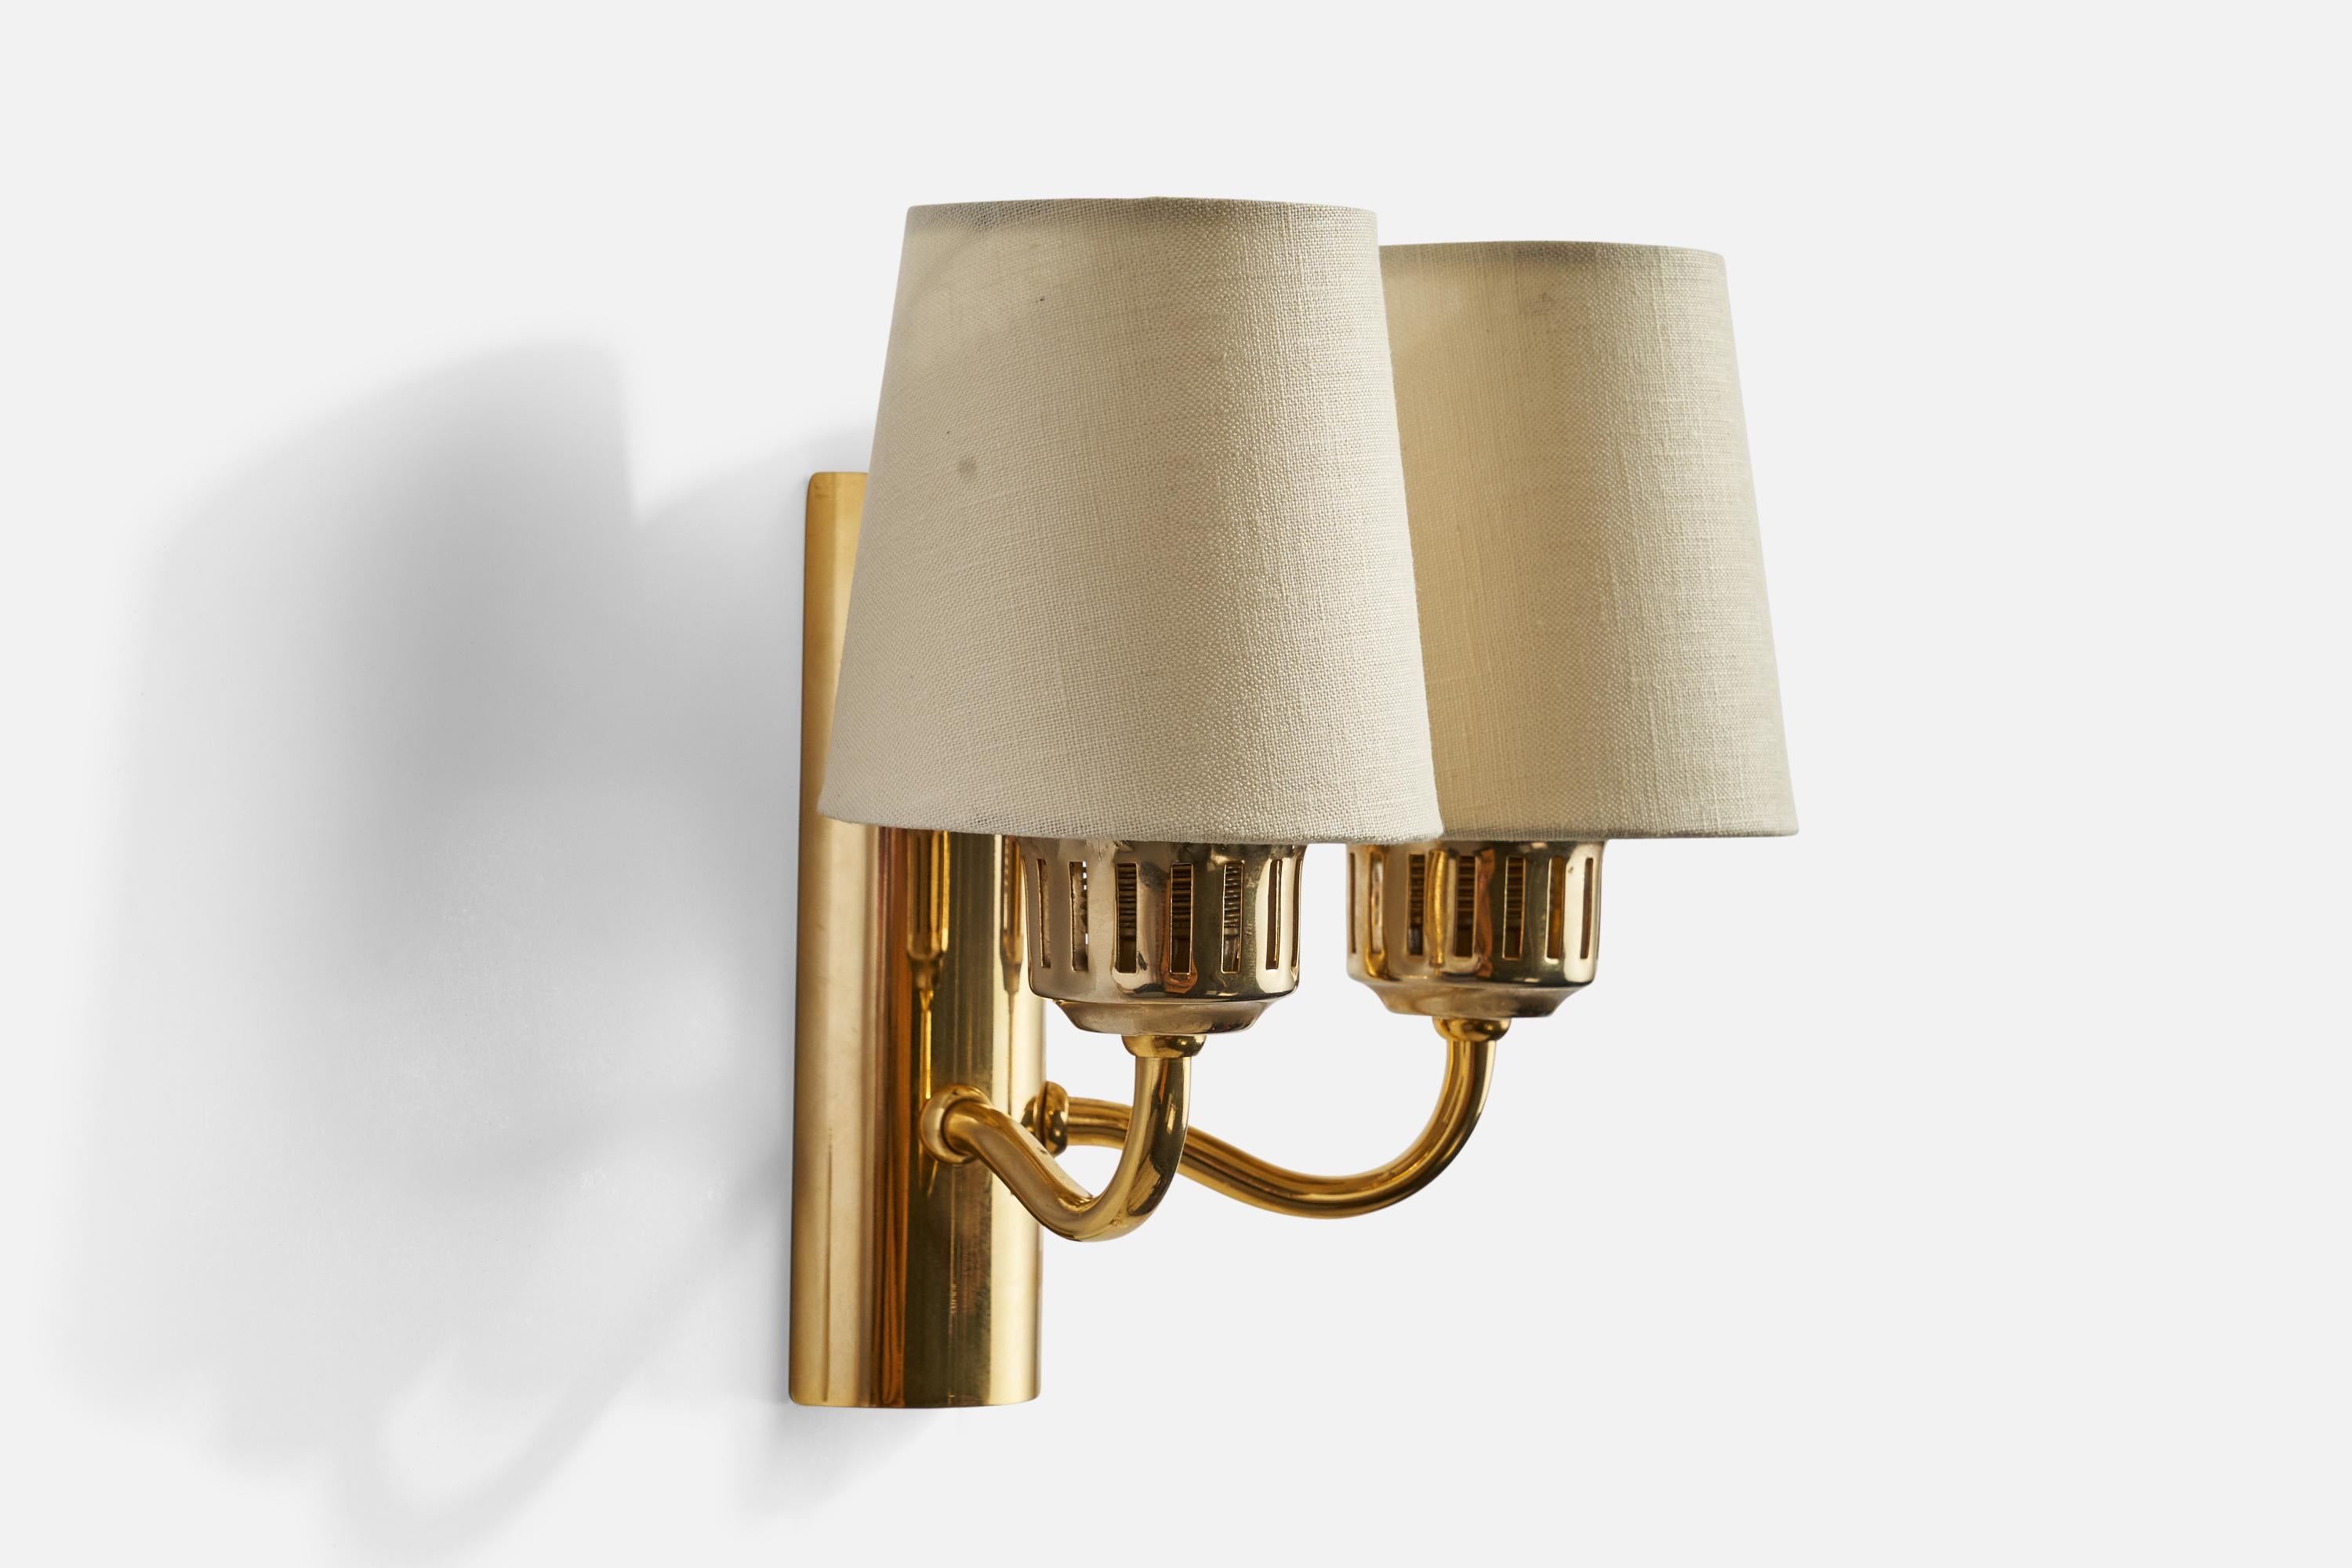 A brass and off-white fabric wall light designed and produced in Sweden, 1970s.

Overall Dimensions (inches): 8.5”  H x 9”  W x 10.5”  D
Back Plate Dimensions (inches): 6.5”  H x 2.25” W x 1.1” D
Bulb Specifications: E-14 Bulb
Number of Sockets: